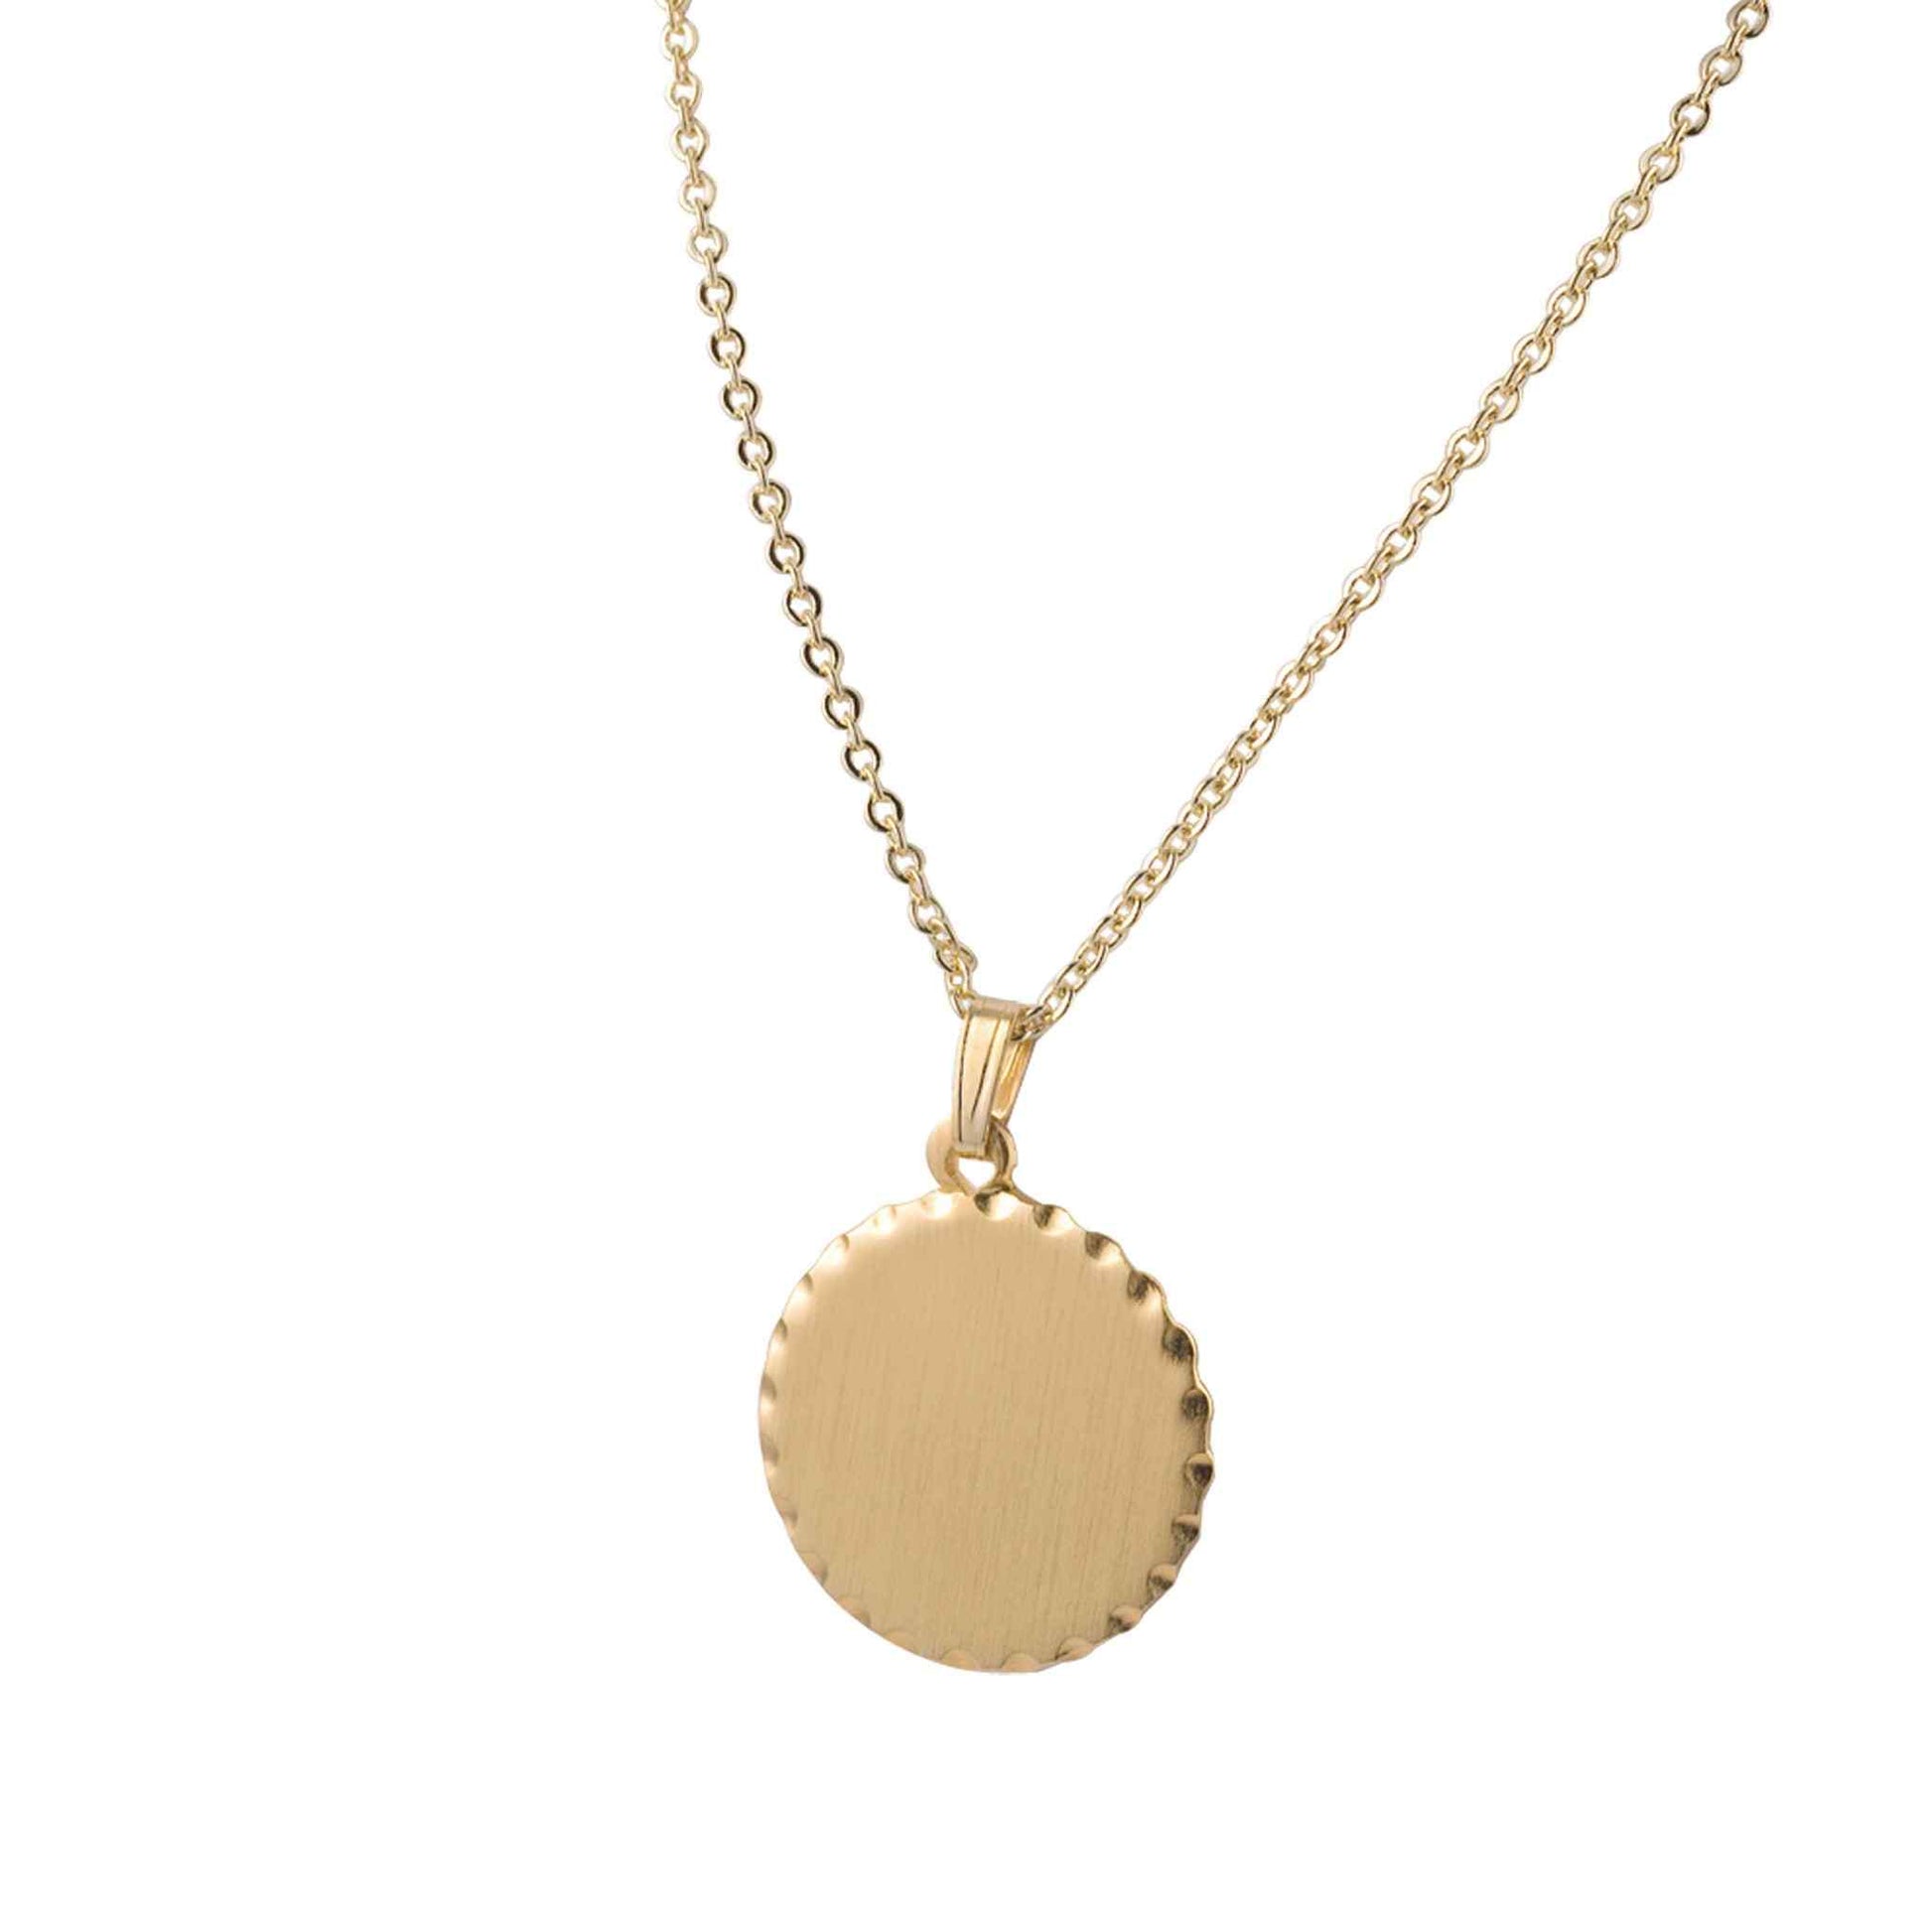 A round necklace with scalloped edge displayed on a neutral white background.